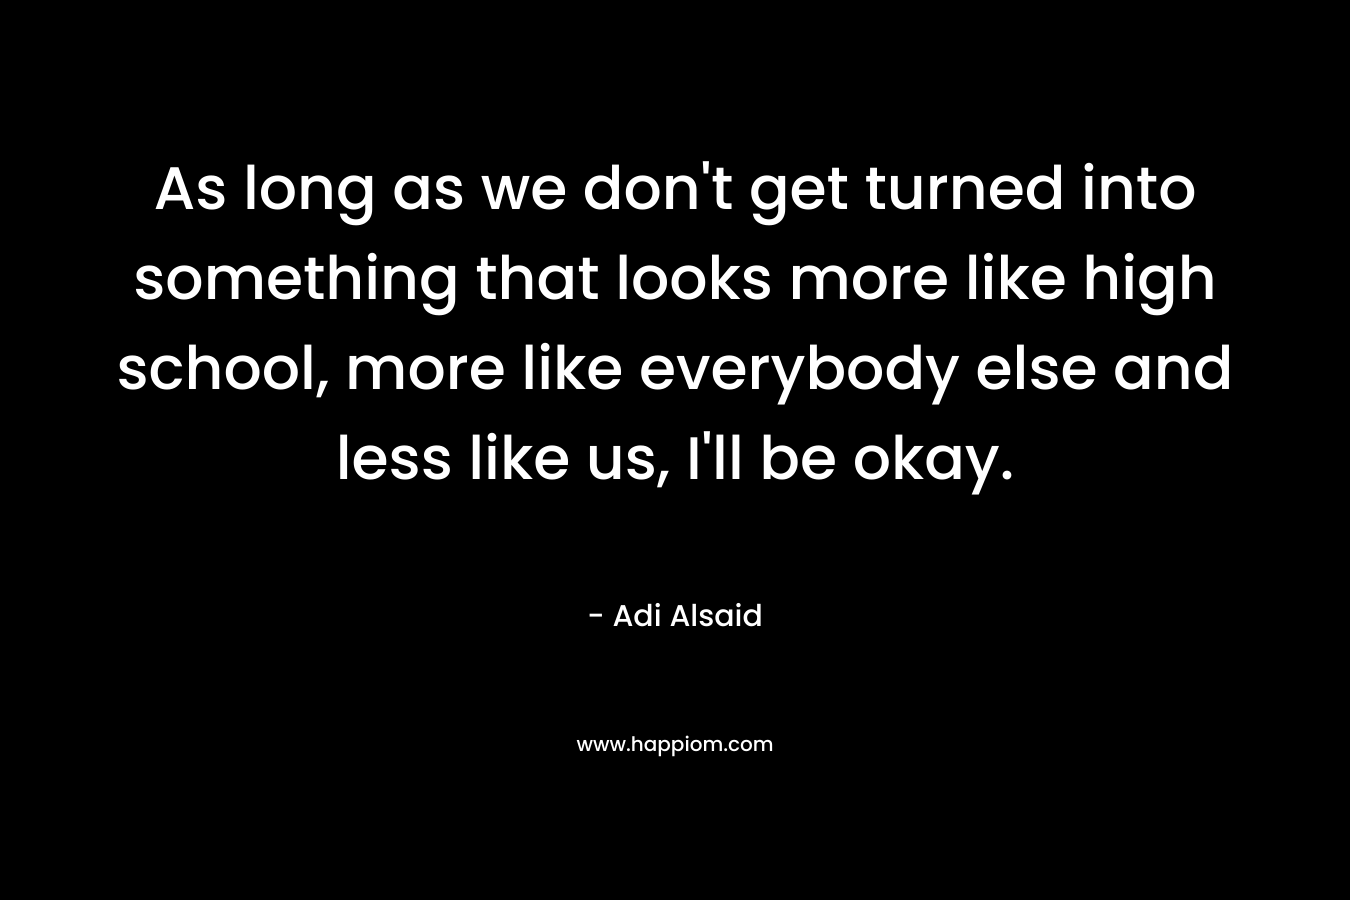 As long as we don't get turned into something that looks more like high school, more like everybody else and less like us, I'll be okay.